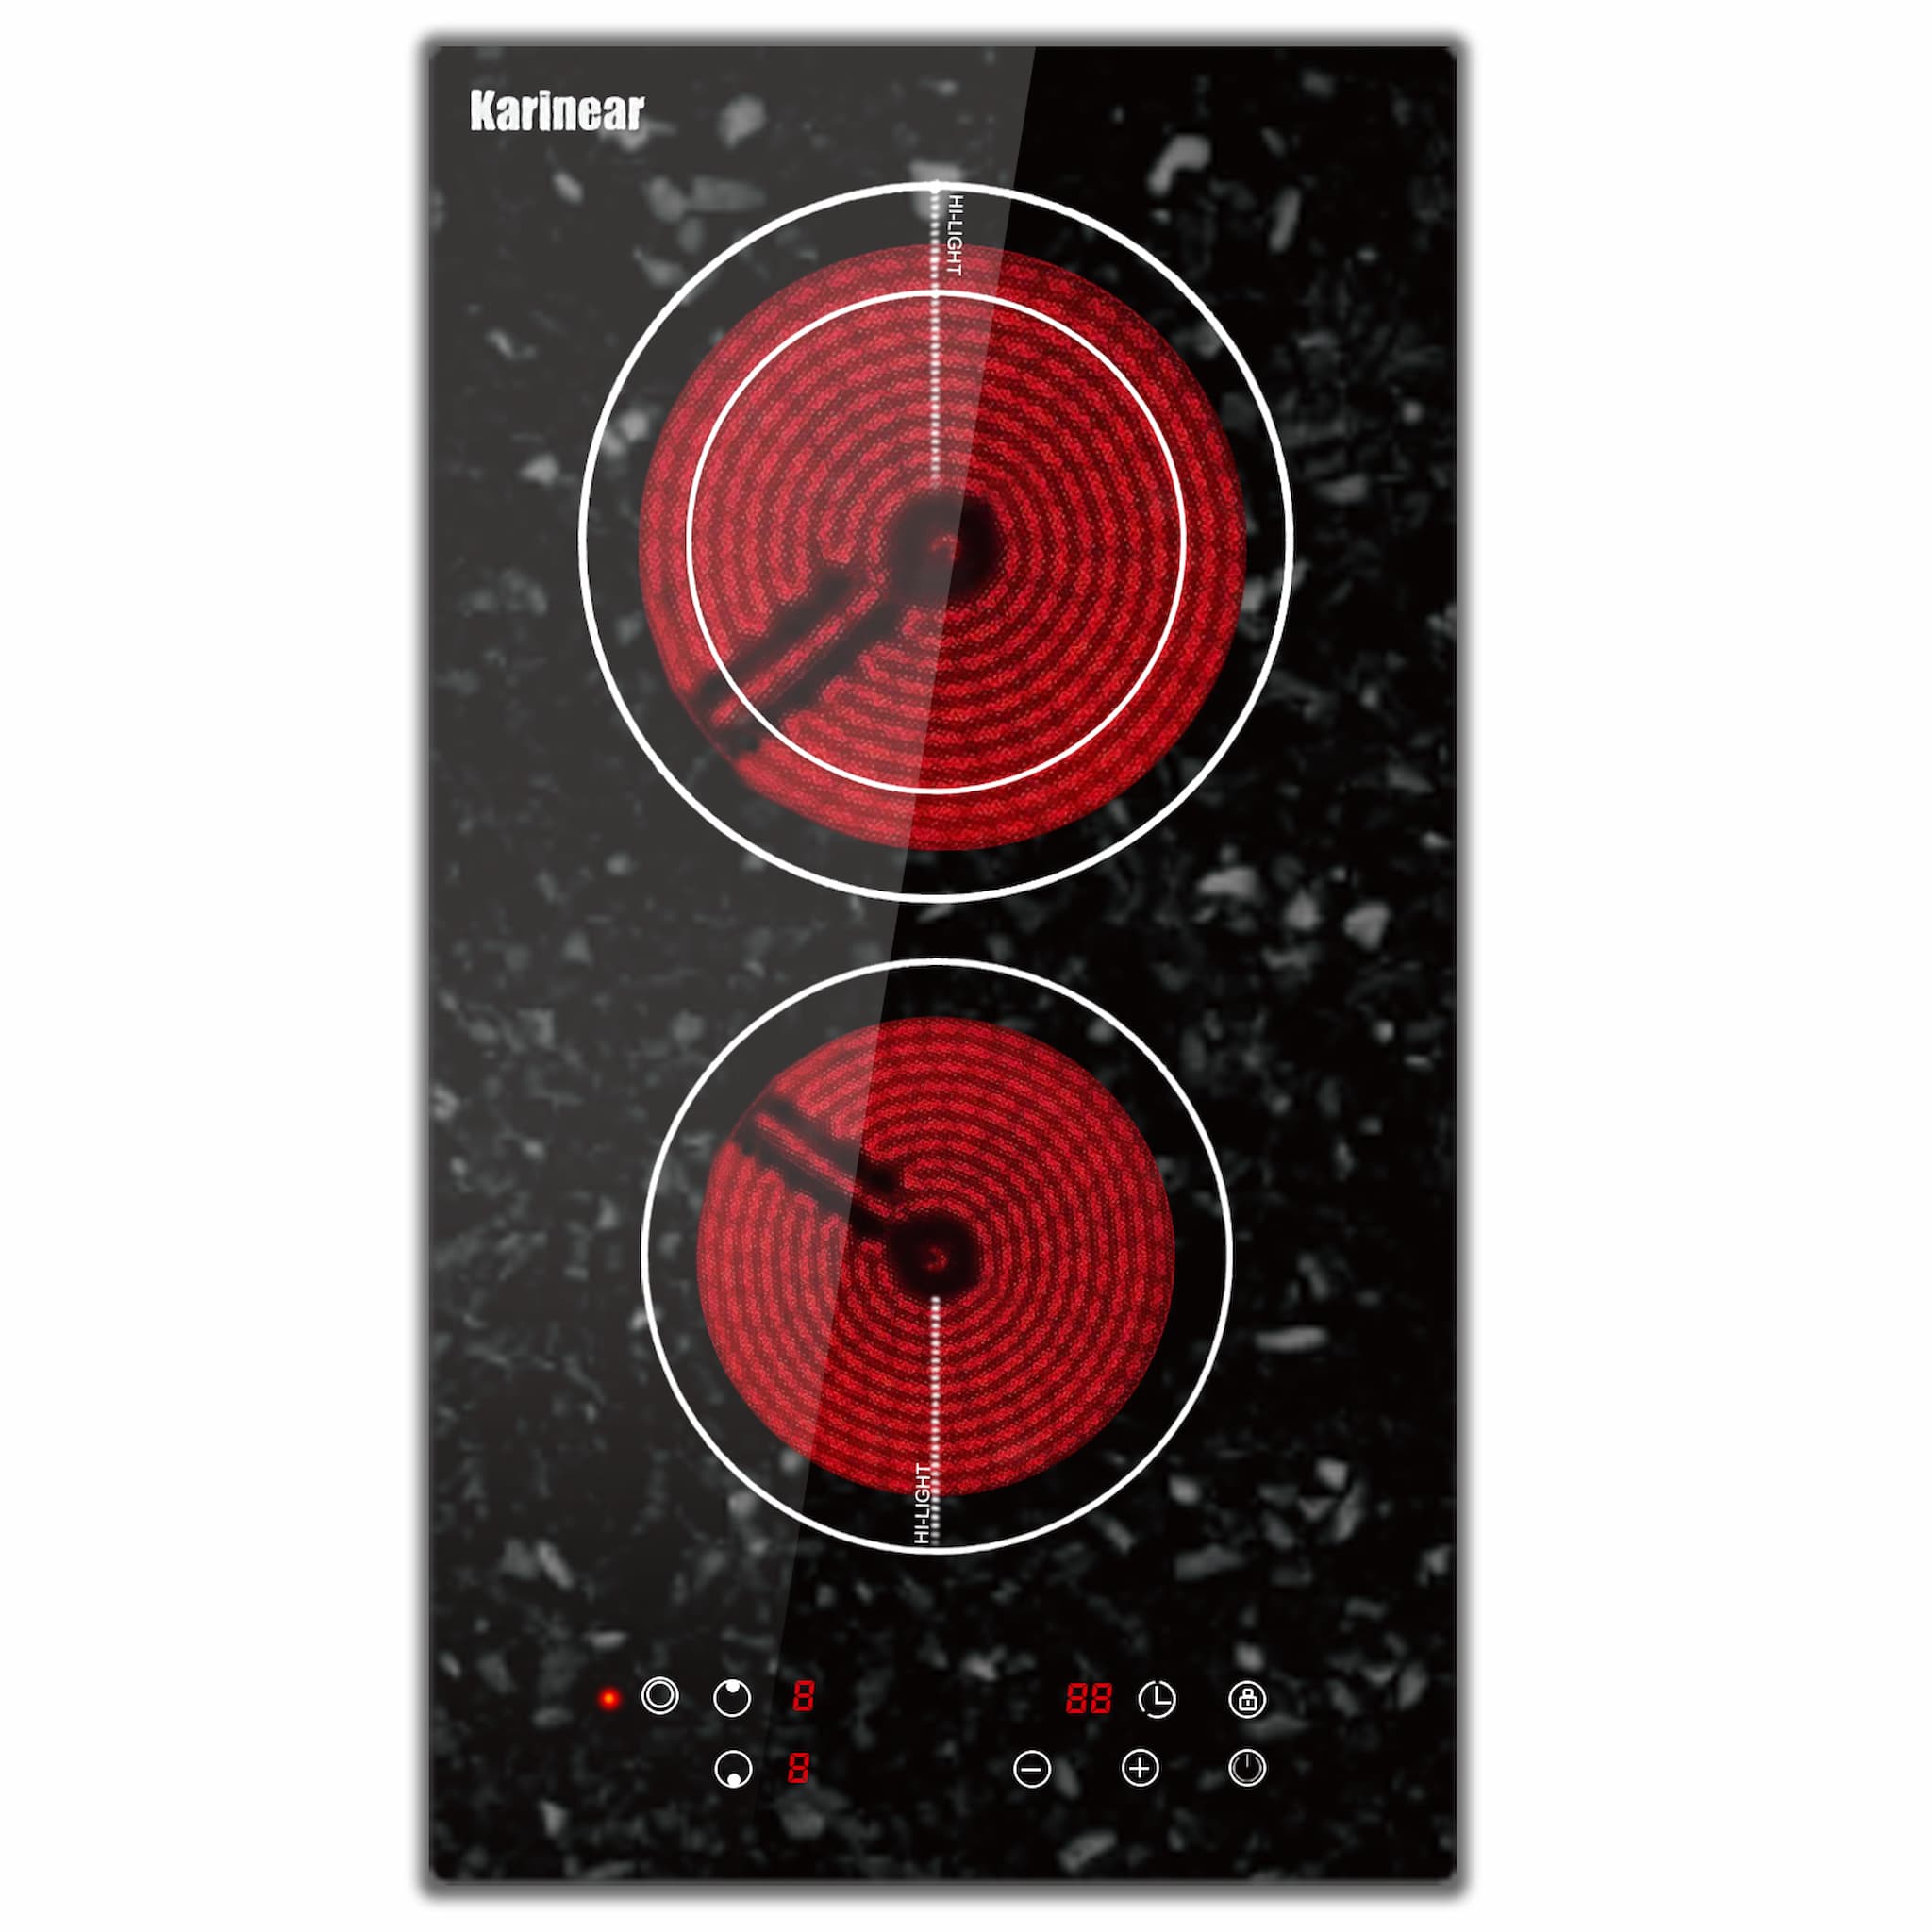 Karinear Electric Cooktop 2 Burners, 12'' Drop-in Electric StoveTop with Marble Patterned Surface, Ceramic Cooktop with Child Lock, Timer, Hot Surface Indicator,3200W,220-240v Hard Wired,No Plug(LH07)